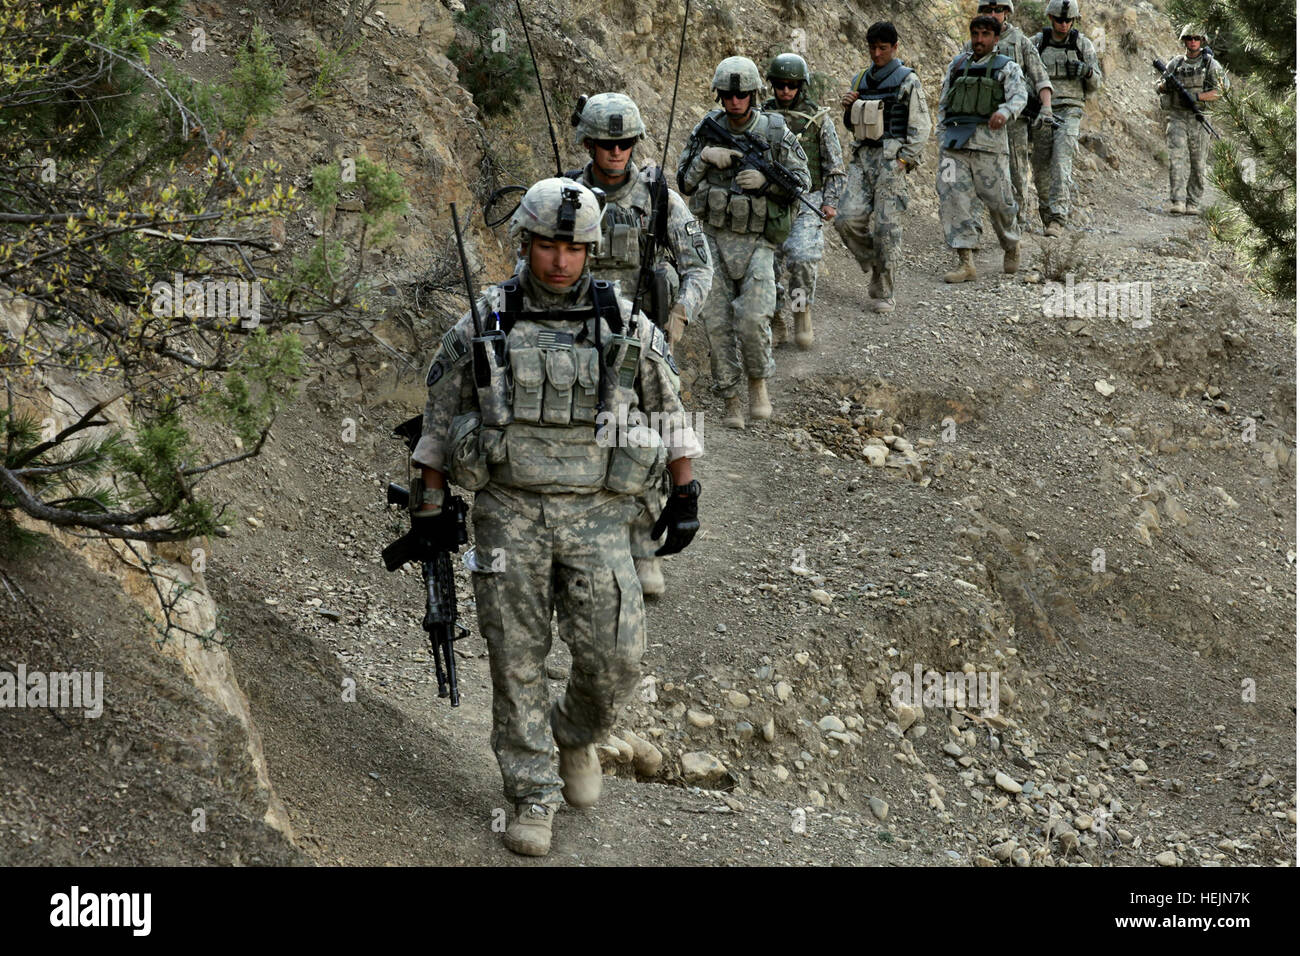 U.S. Soldiers with Apache Troop, 1st Squadron, 40th Cavalry Regiment and Afghan Border Policemen walk along a mountain trail during a patrol near Combat Outpost Herrera in the Paktiya province of Afghanistan Oct. 13, 2009. (DoD photo by Staff Sgt. Andrew Smith, U.S. Army/Released) Flickr - The U.S. Army - Afghan Border Police in Paktiya province Stock Photo